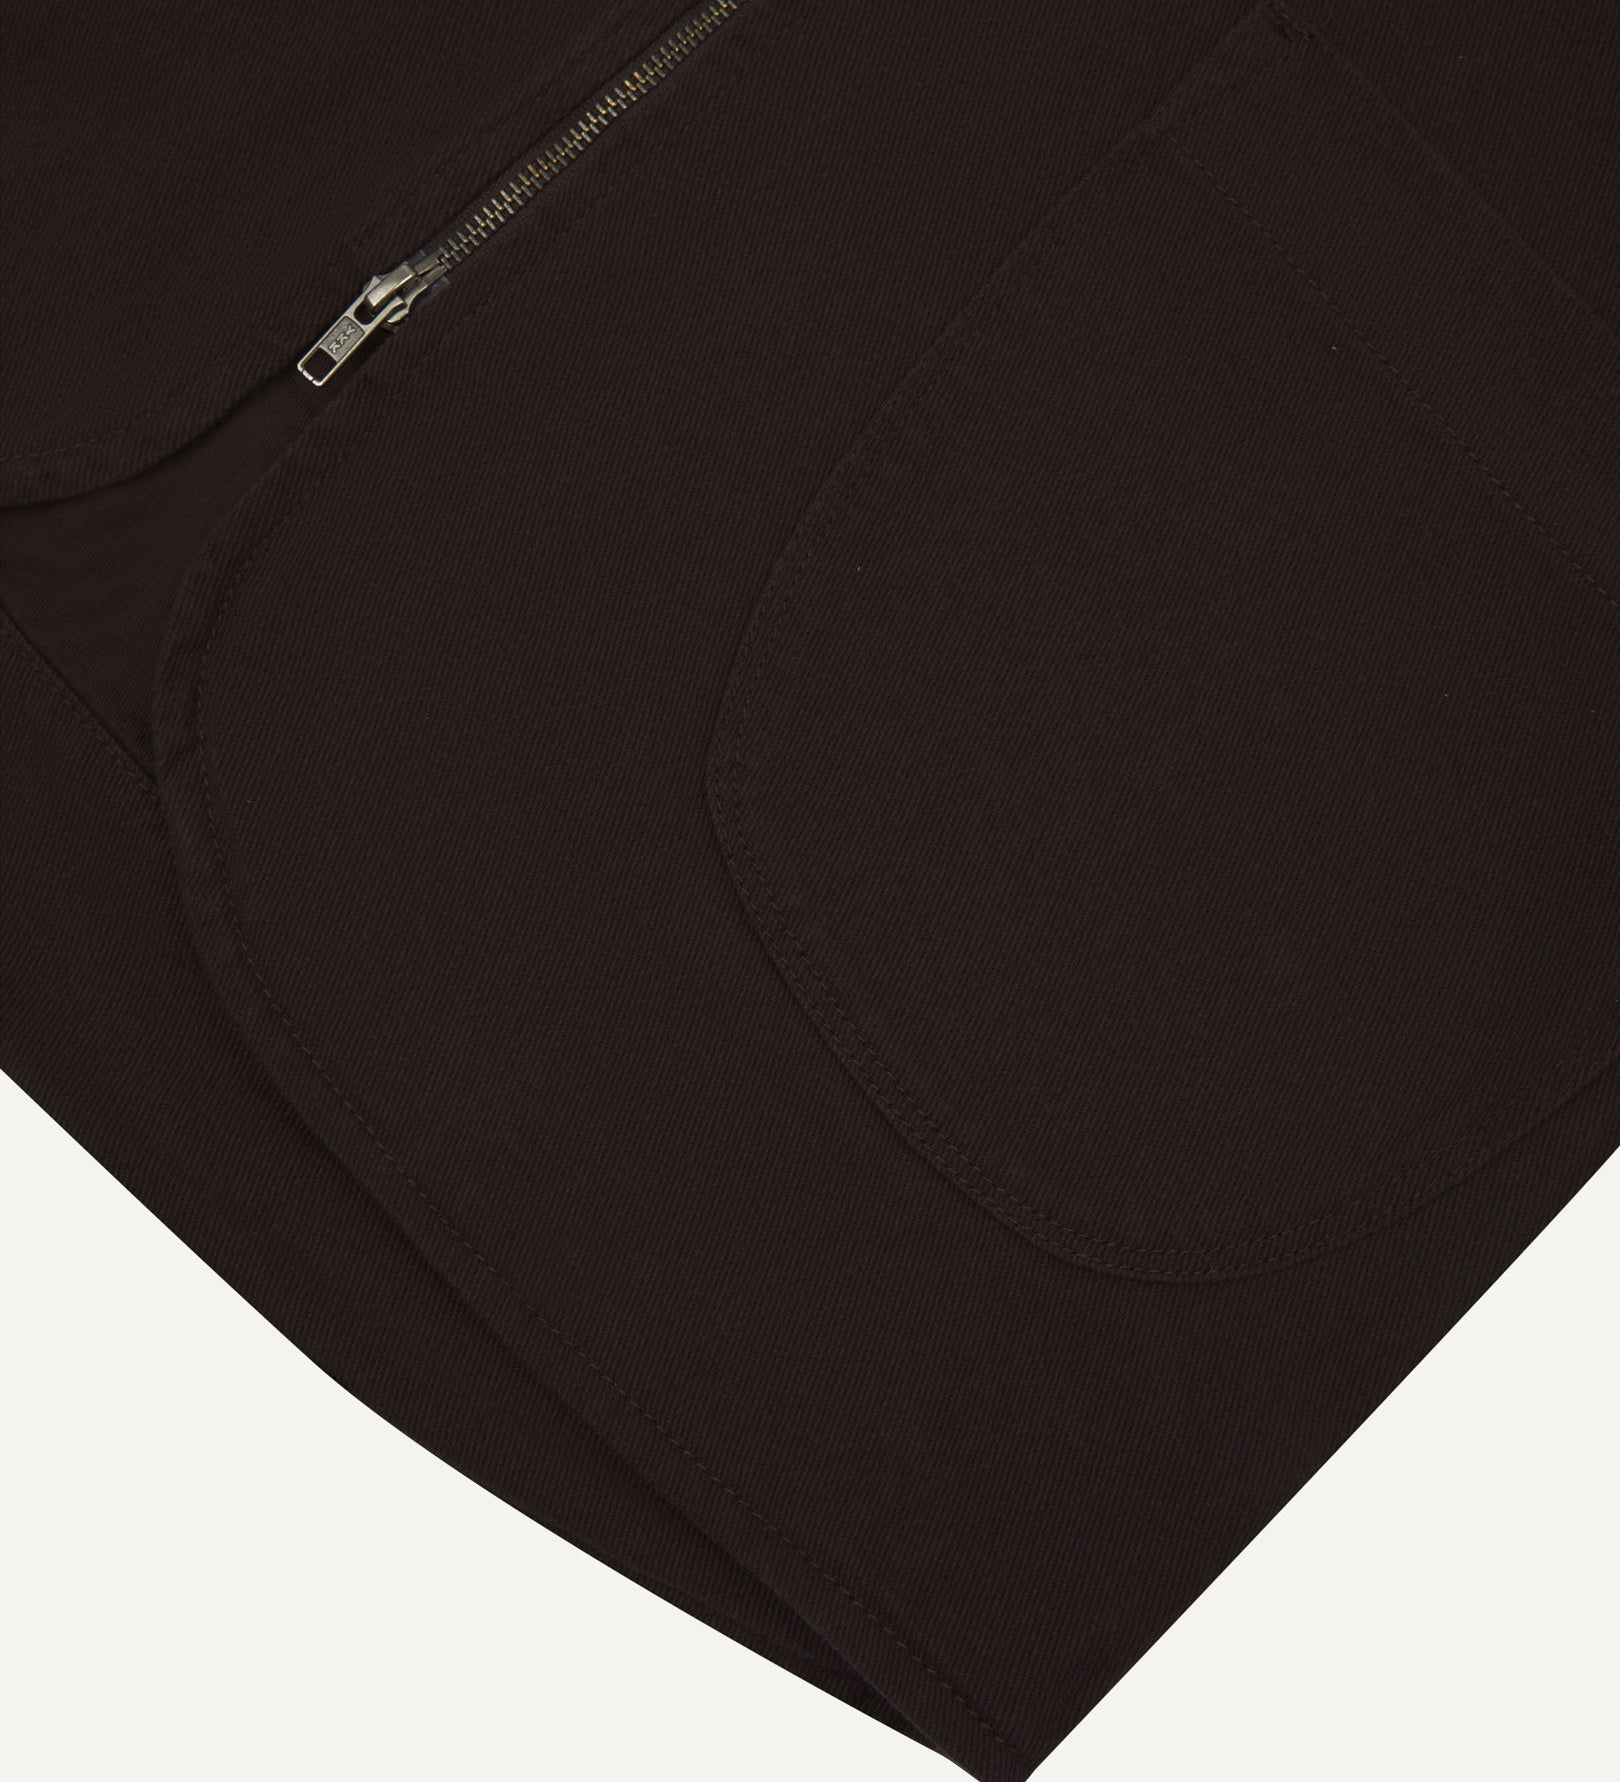 Close-up bottom-half view of #3036 burgundy-brown organic cotton-drill vest with focus on curved pocket detail.